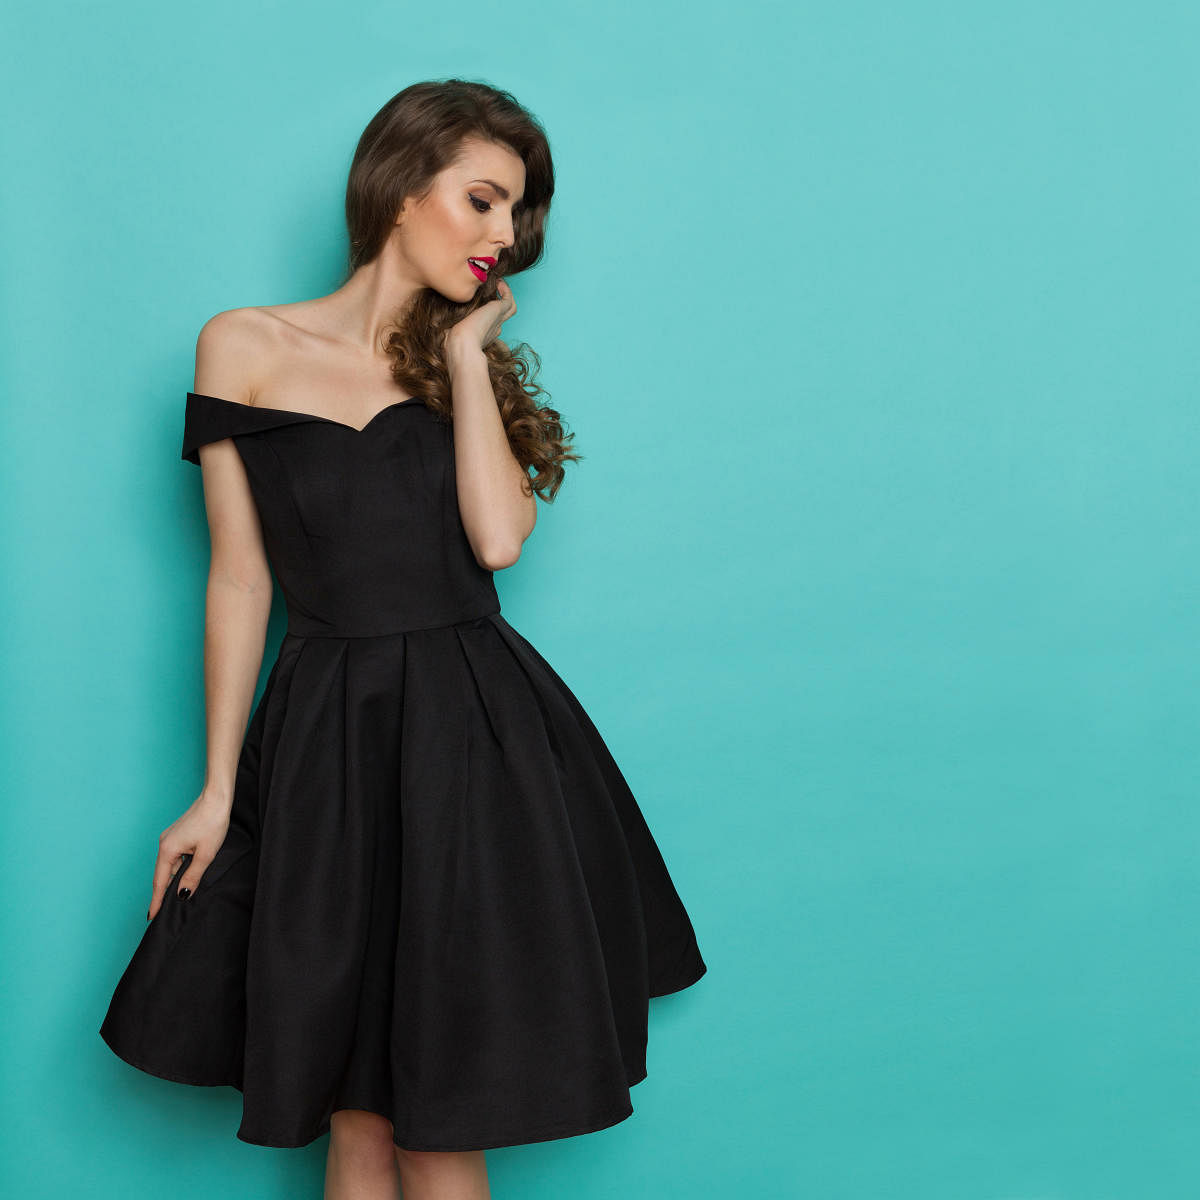 Beautiful young woman in elegant black cocktail dress is looking away. Three quarter length studio shot on turquoise background.